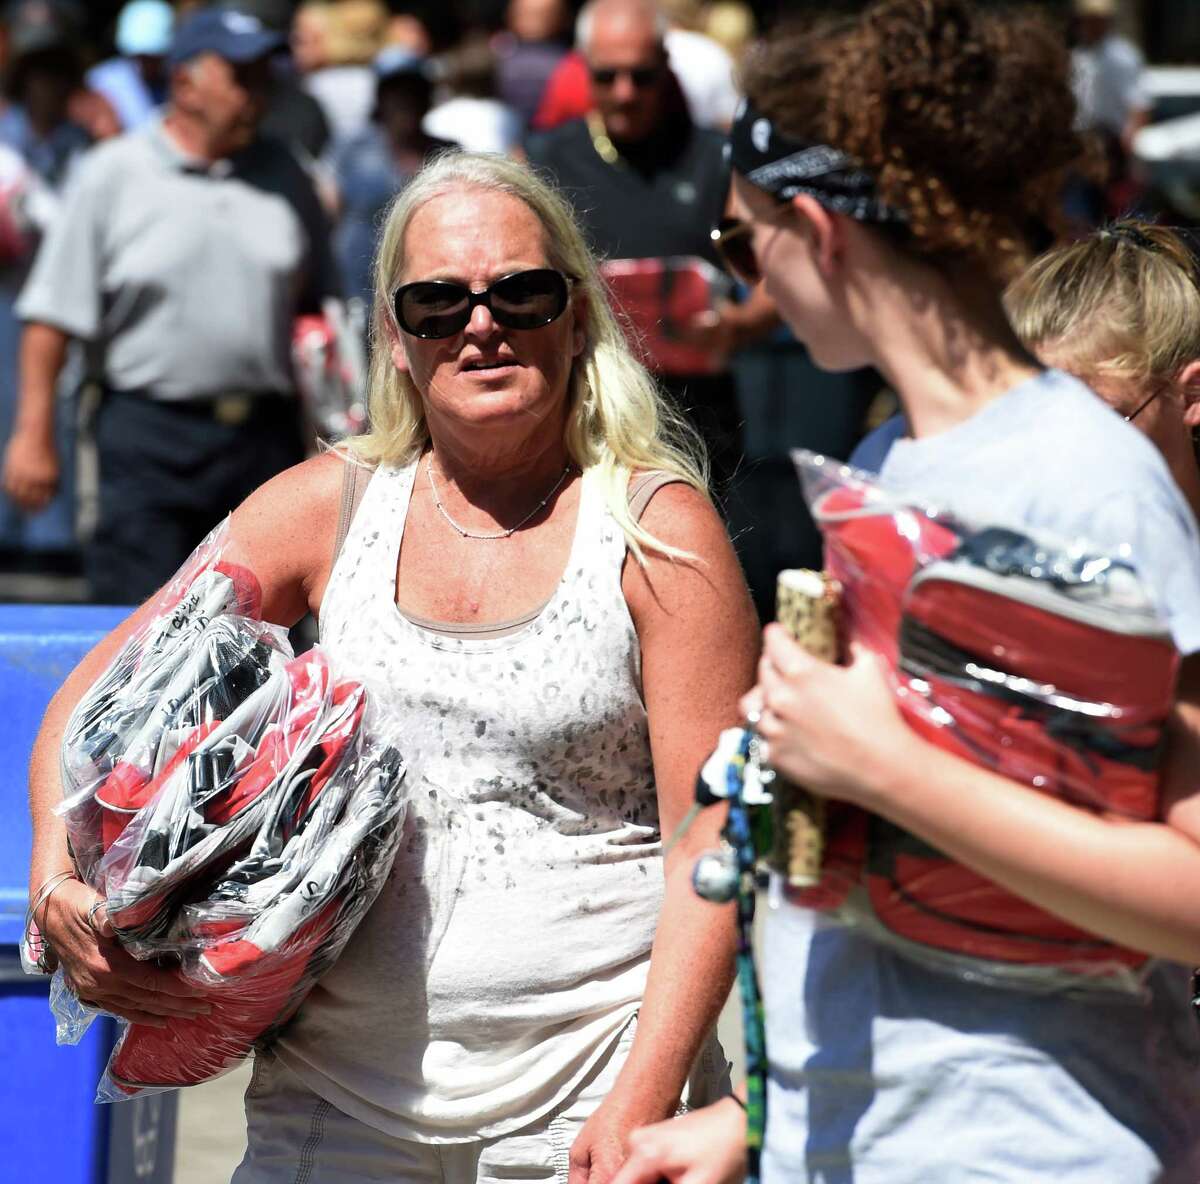 Racing patrons haul away arm loads of cooler bags, the most recent giveaway of the Saratoga season Monday morning Aug. 3, 2015 at the Saratoga Race Course in Saratoga Springs, N.Y. (Skip Dickstein/Times Union)